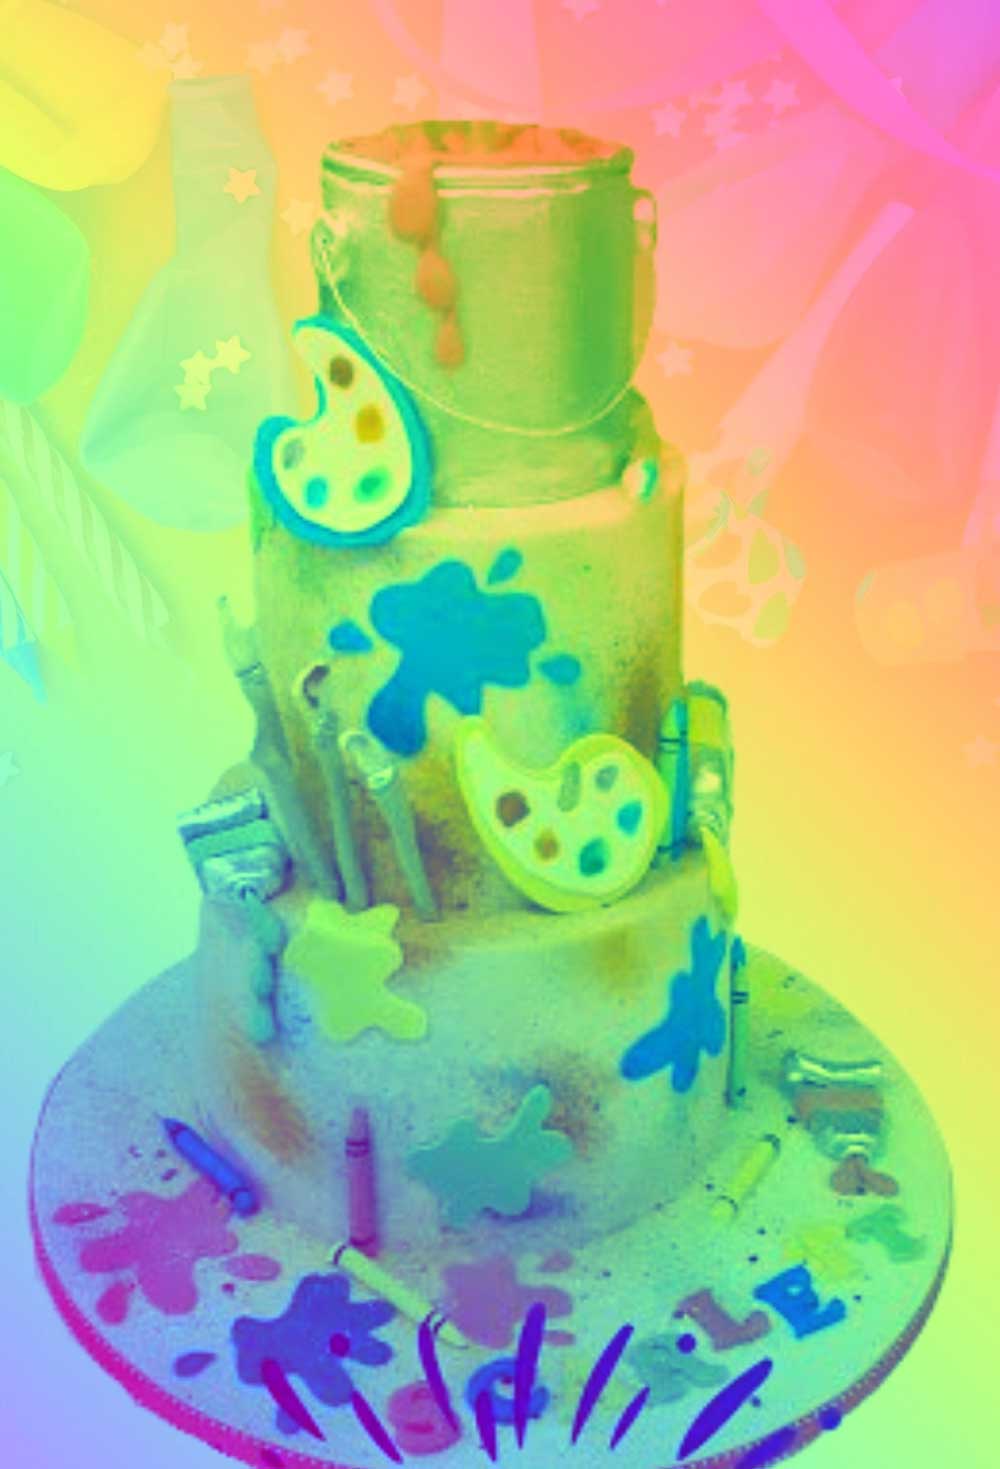 A cake with different colored frosting and designs.